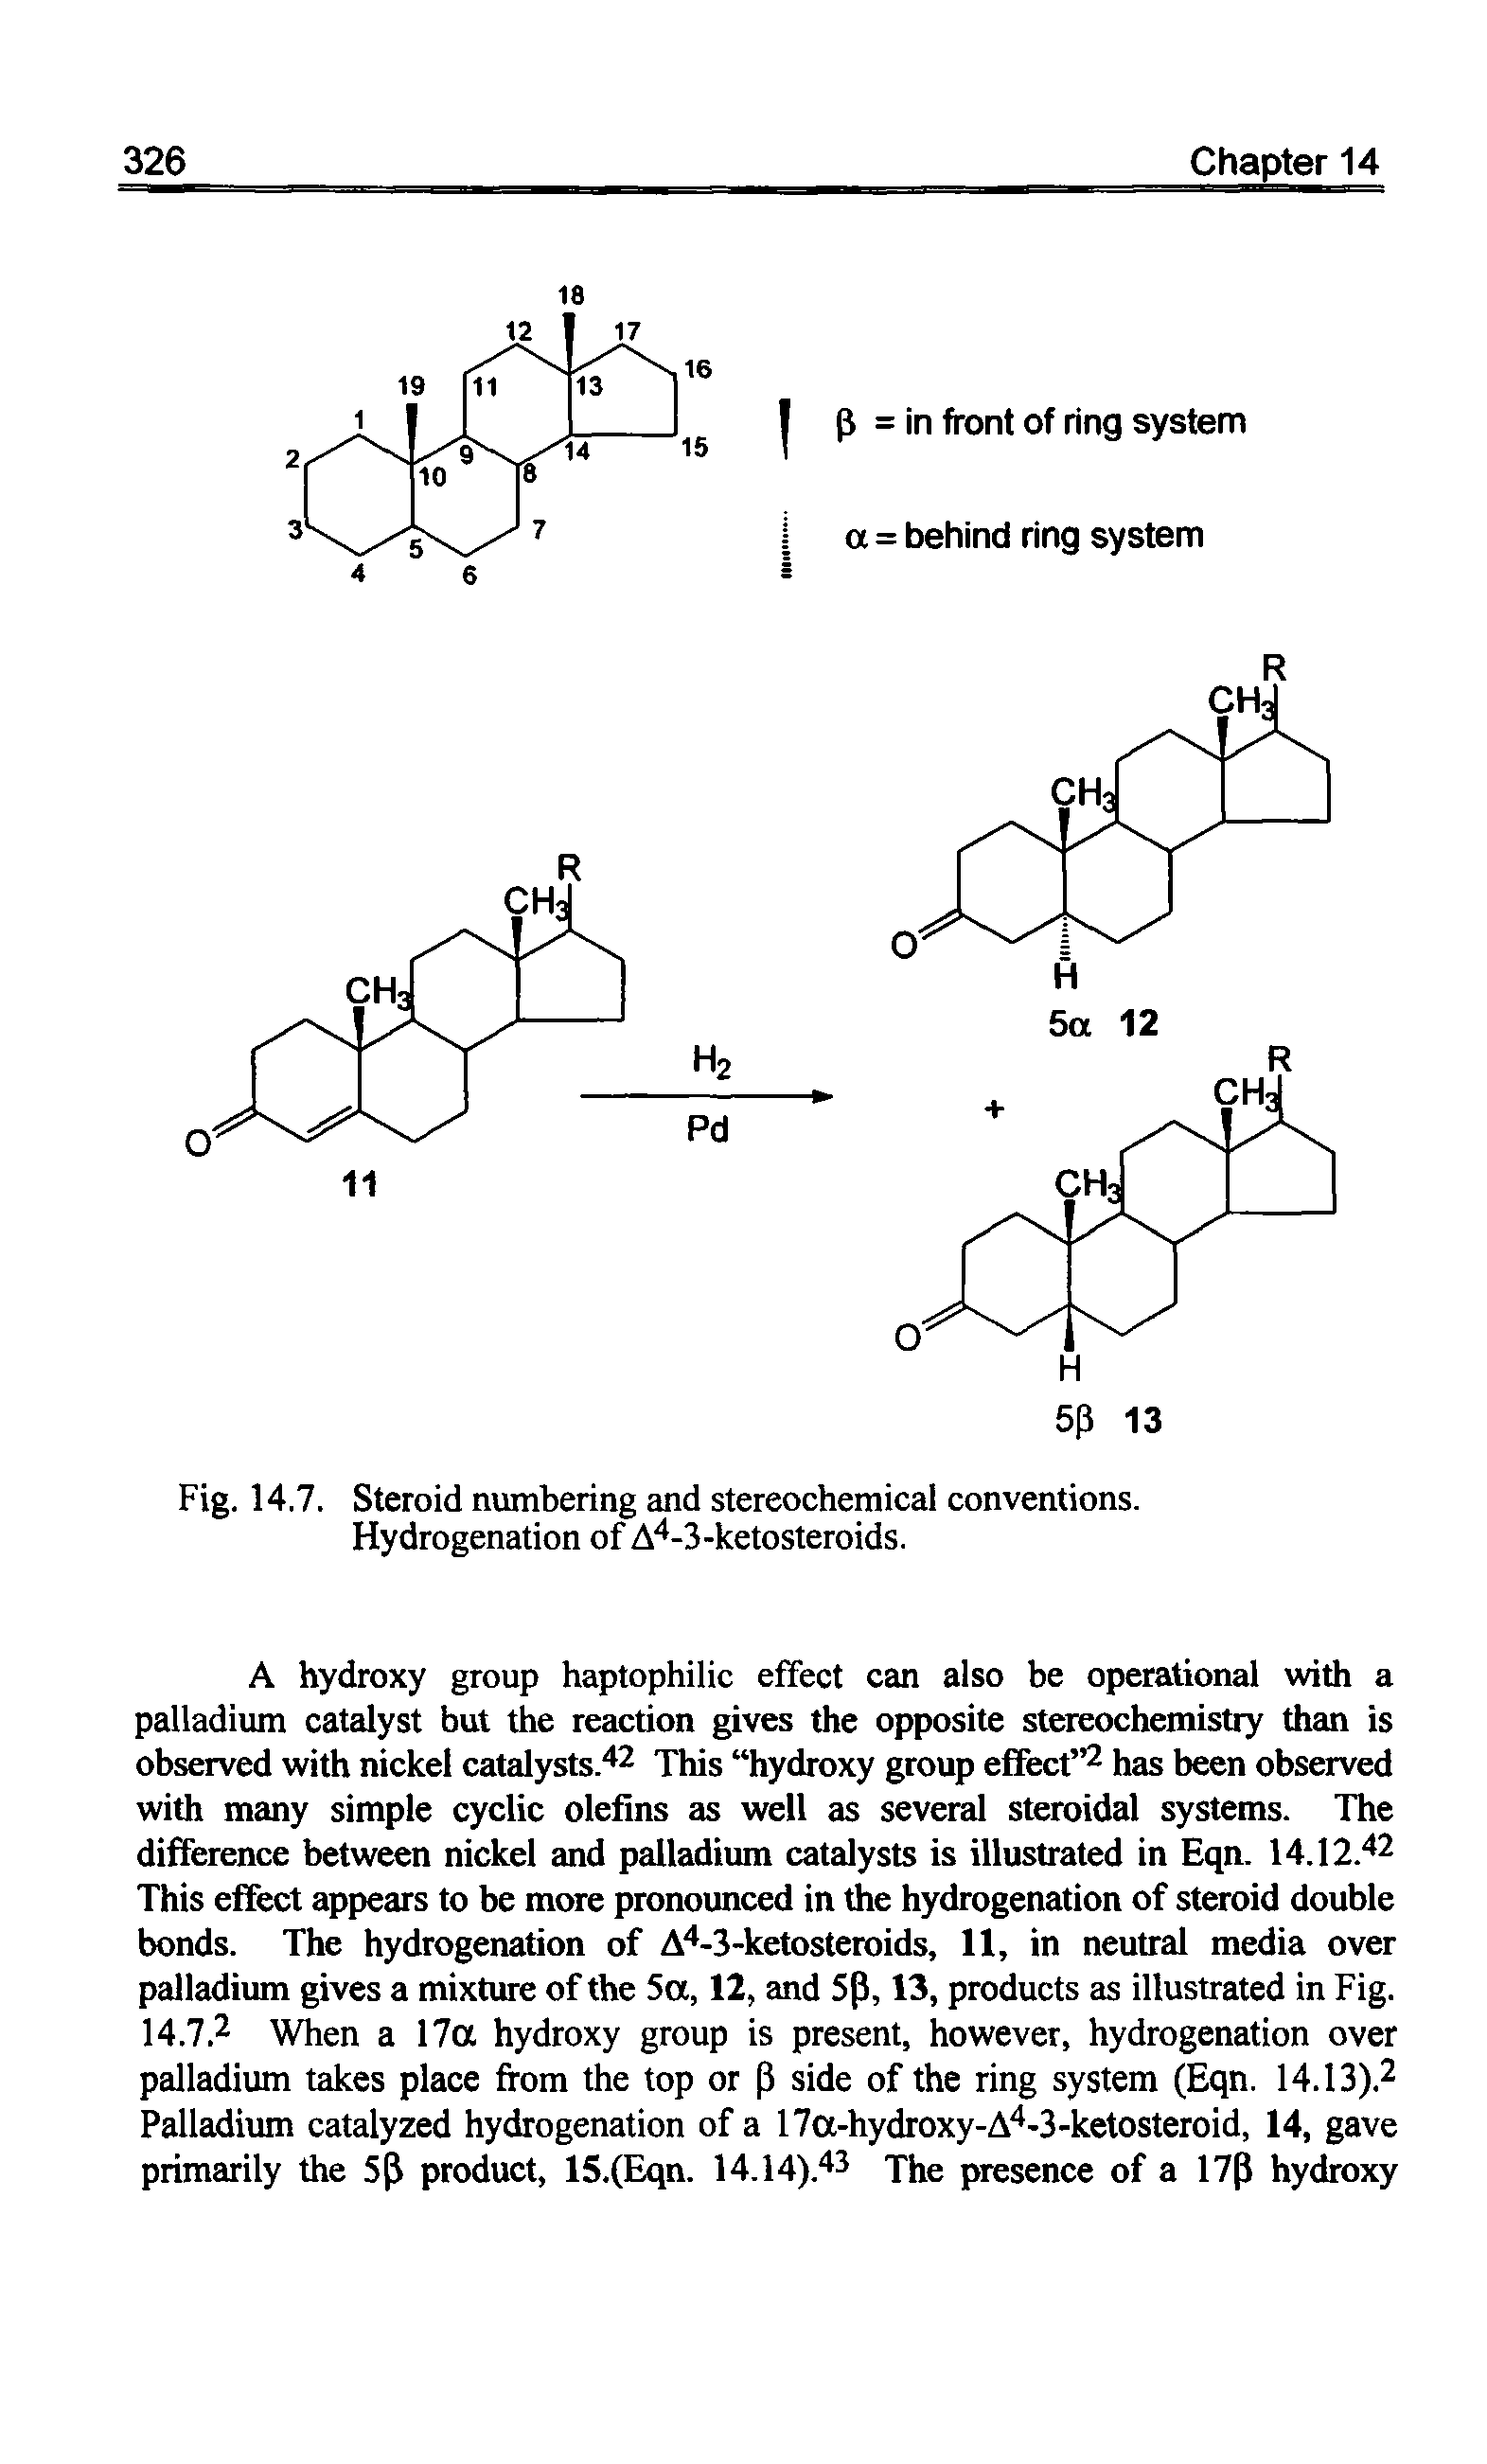 Fig. 14,7. Steroid numbering and stereochemical conventions. Hydrogenation of A -3-ketosteroids.